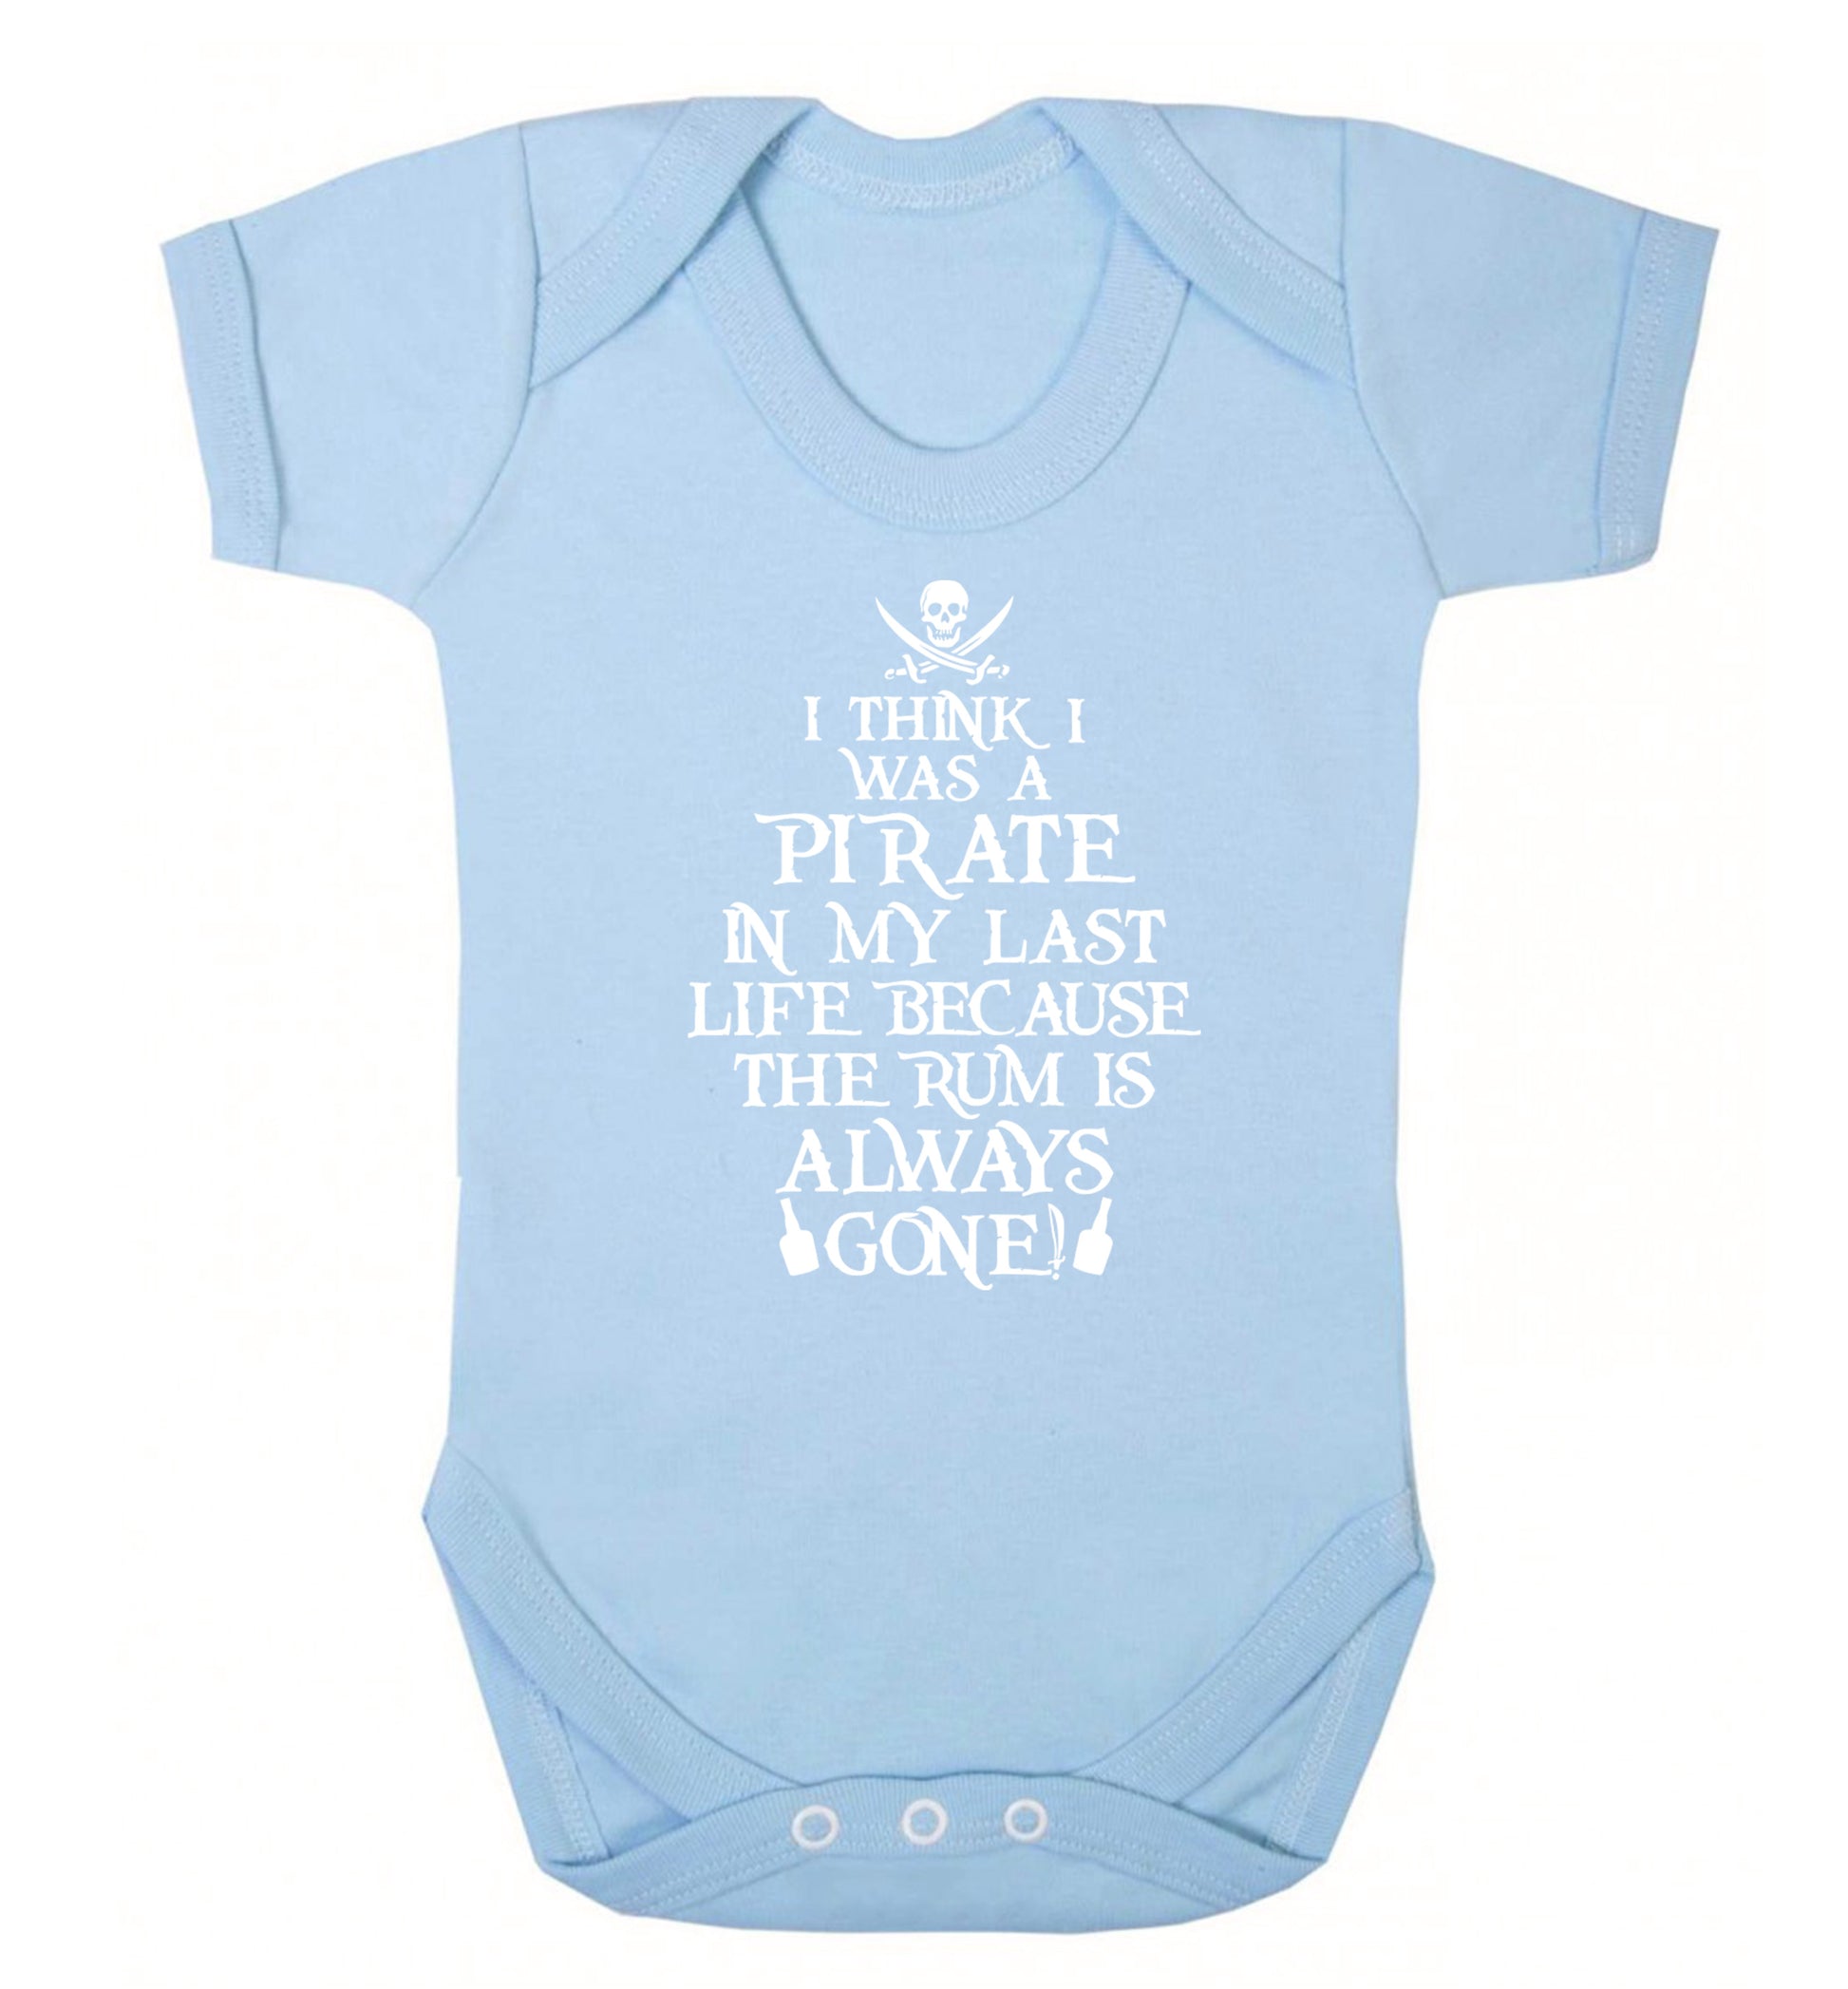 I think I was a pirate in my past life because the rum is always gone! Baby Vest pale blue 18-24 months